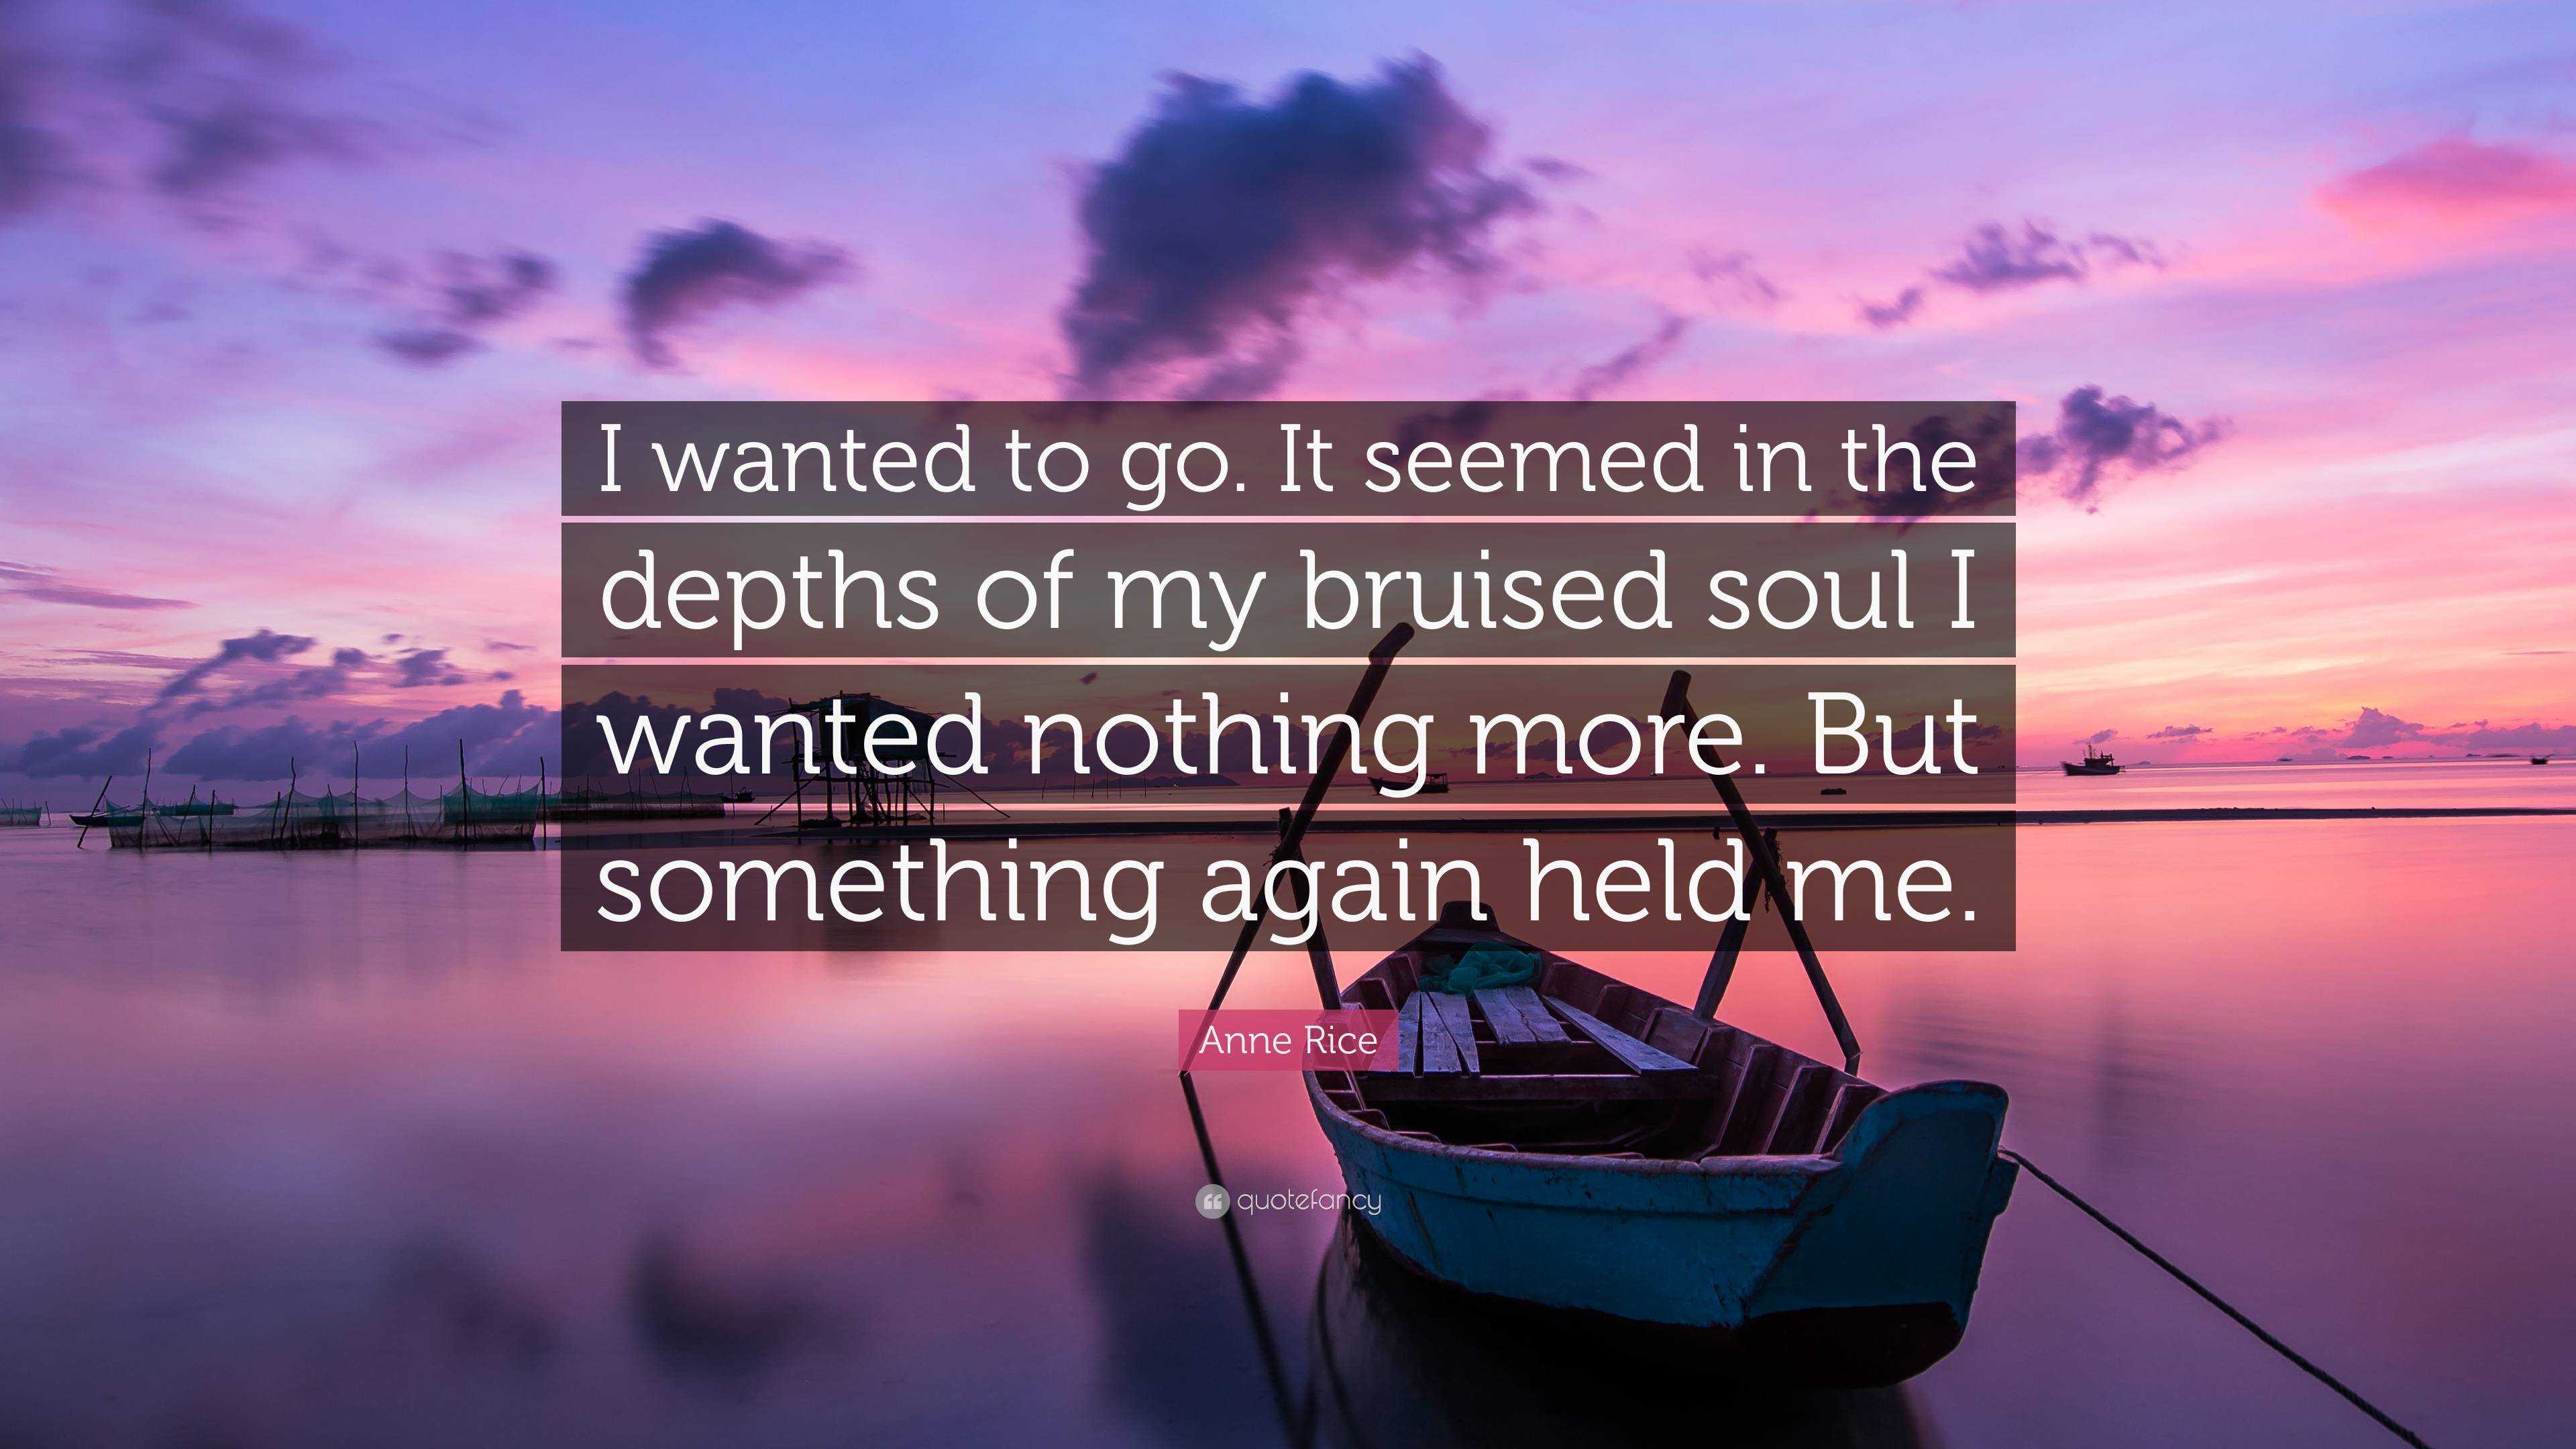 Anne Rice Quote: “I wanted to go. It seemed in the depths of my bruised ...